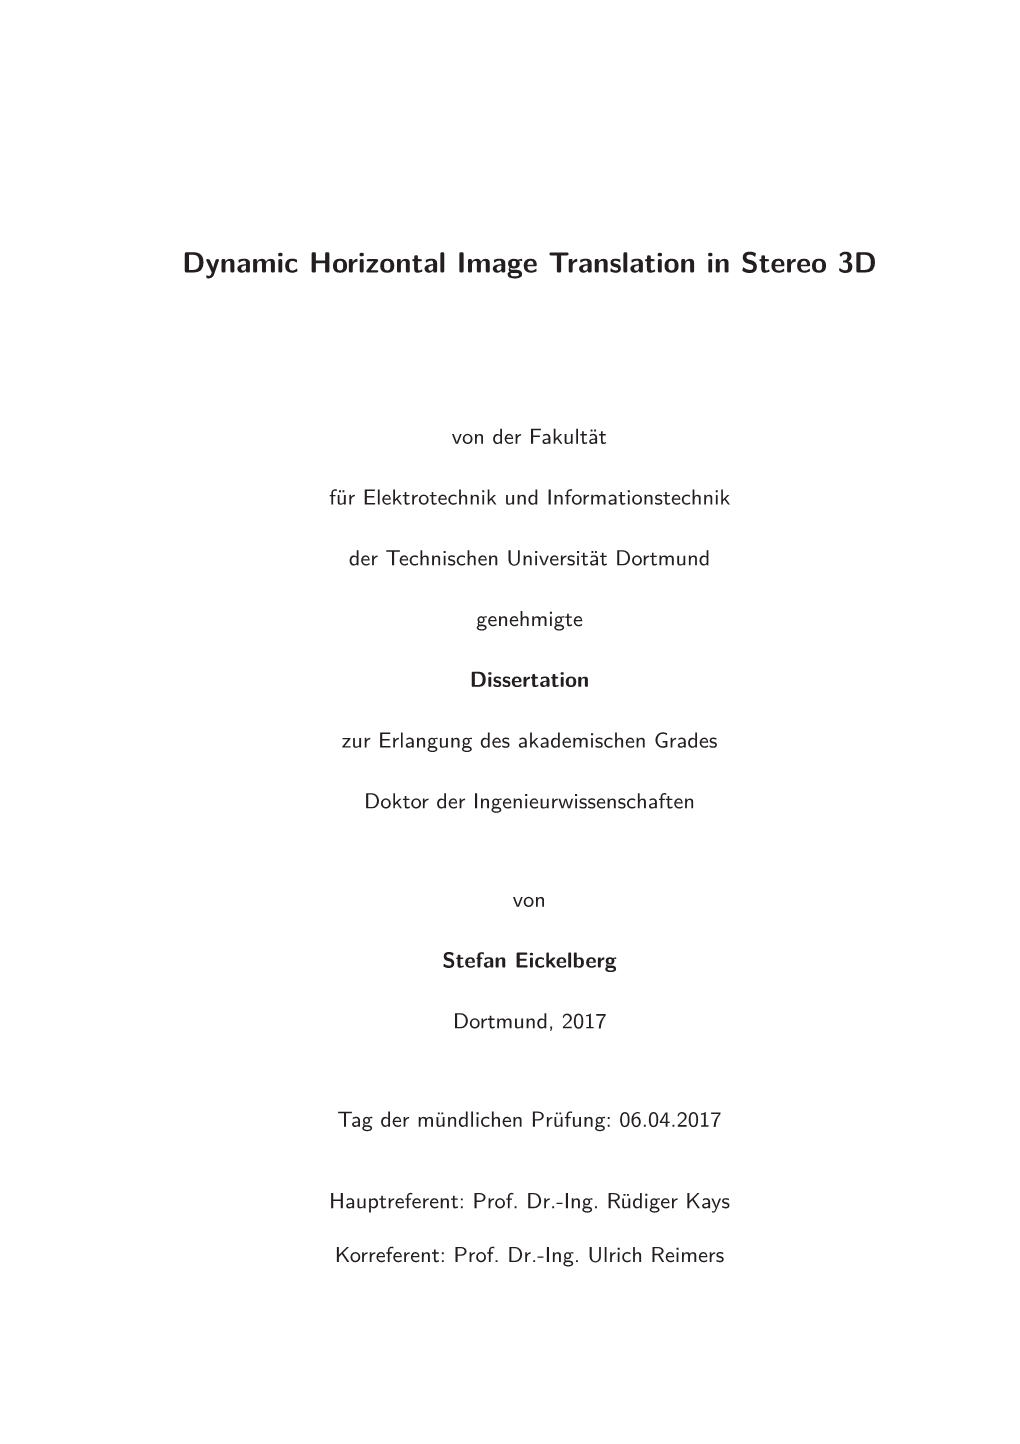 Dynamic Horizontal Image Translation in Stereo 3D